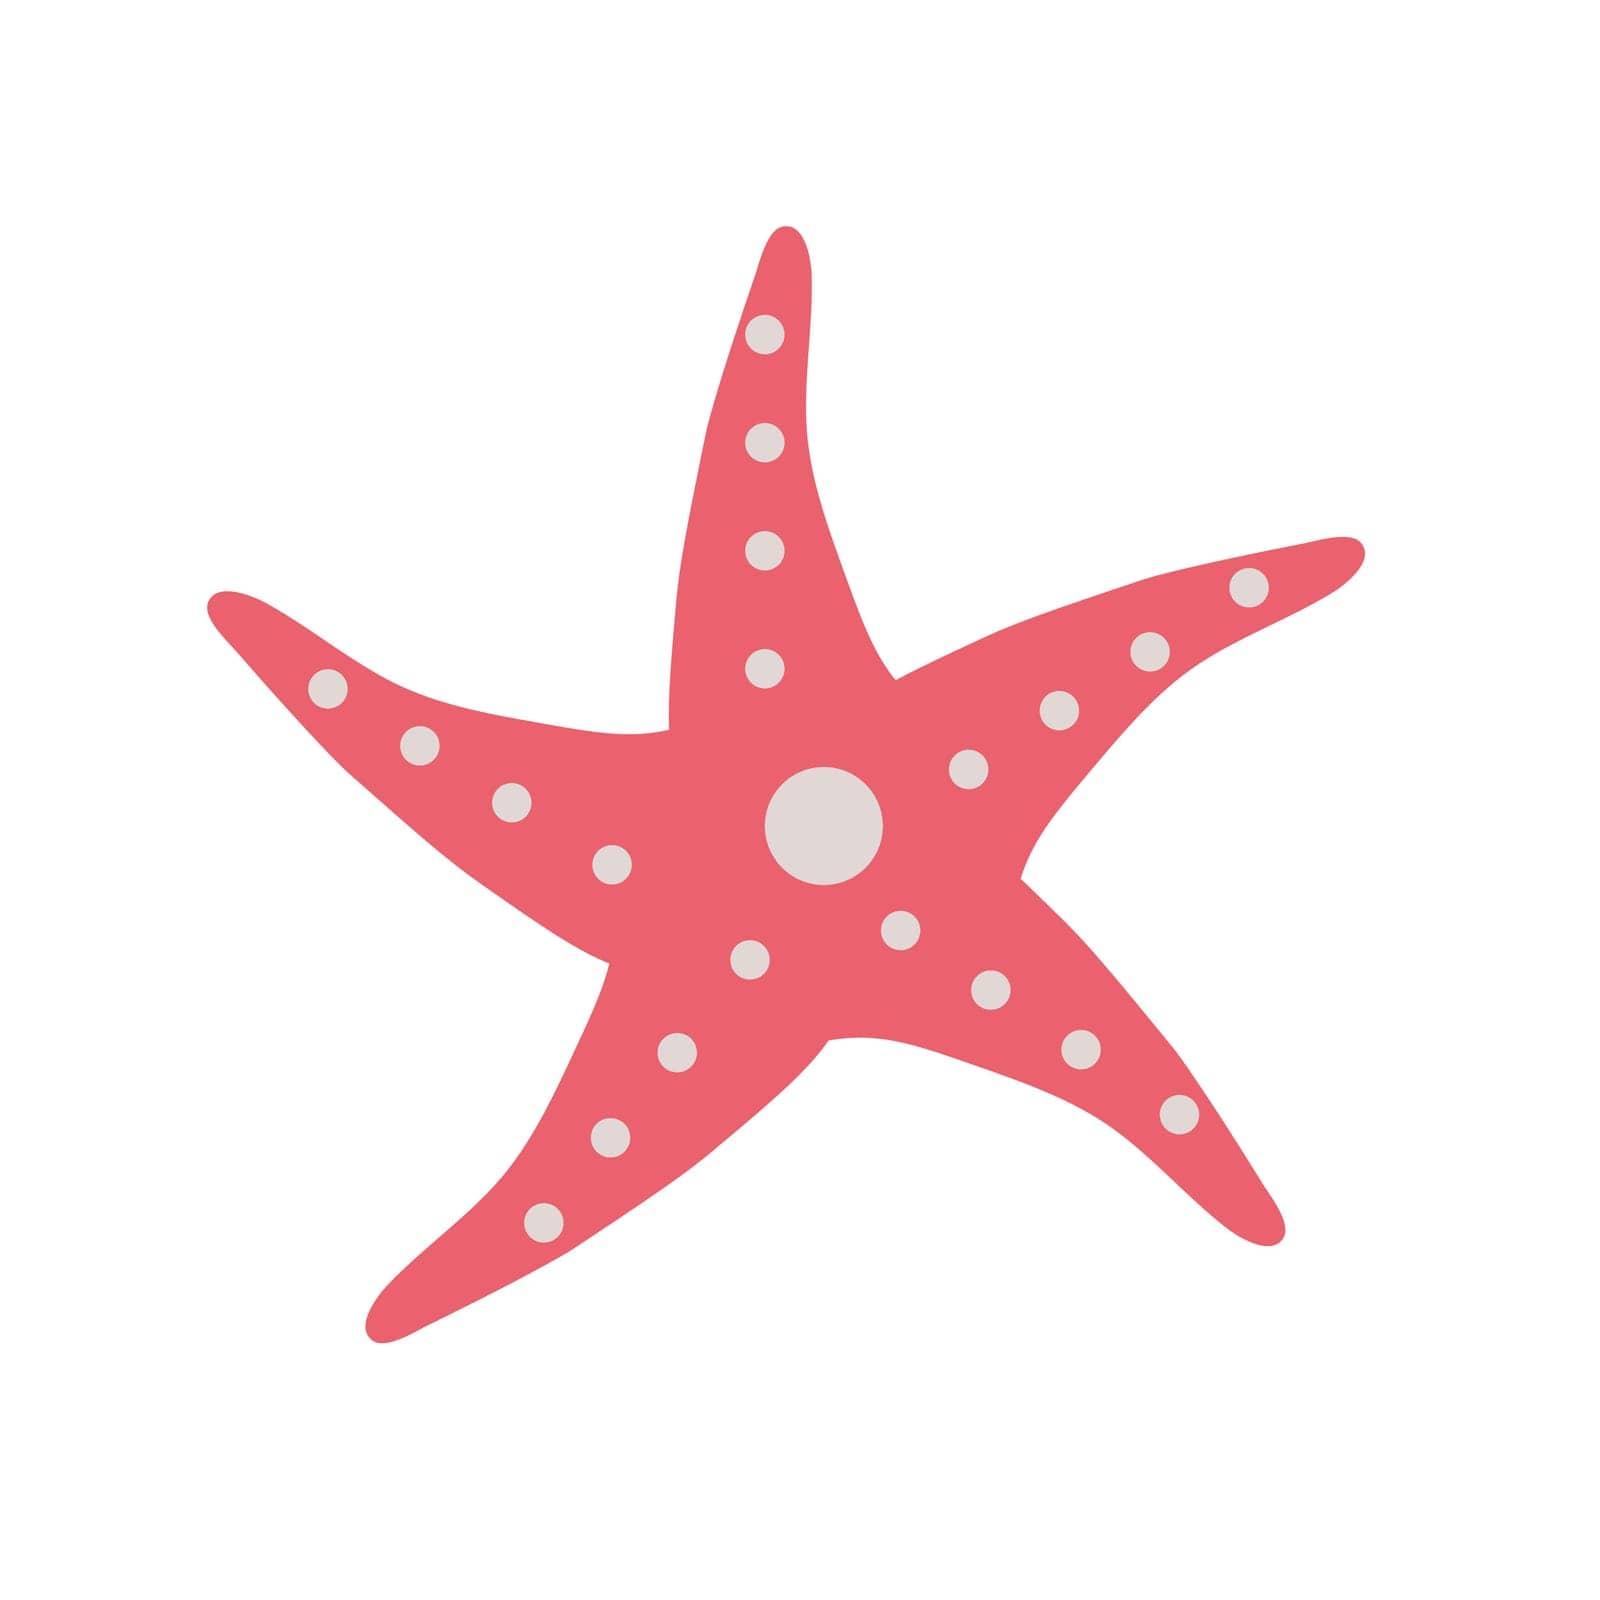 Starfish. A star living in the sea. Vector illustration. Isolated object, element on a white background. EPS by Alxyzt